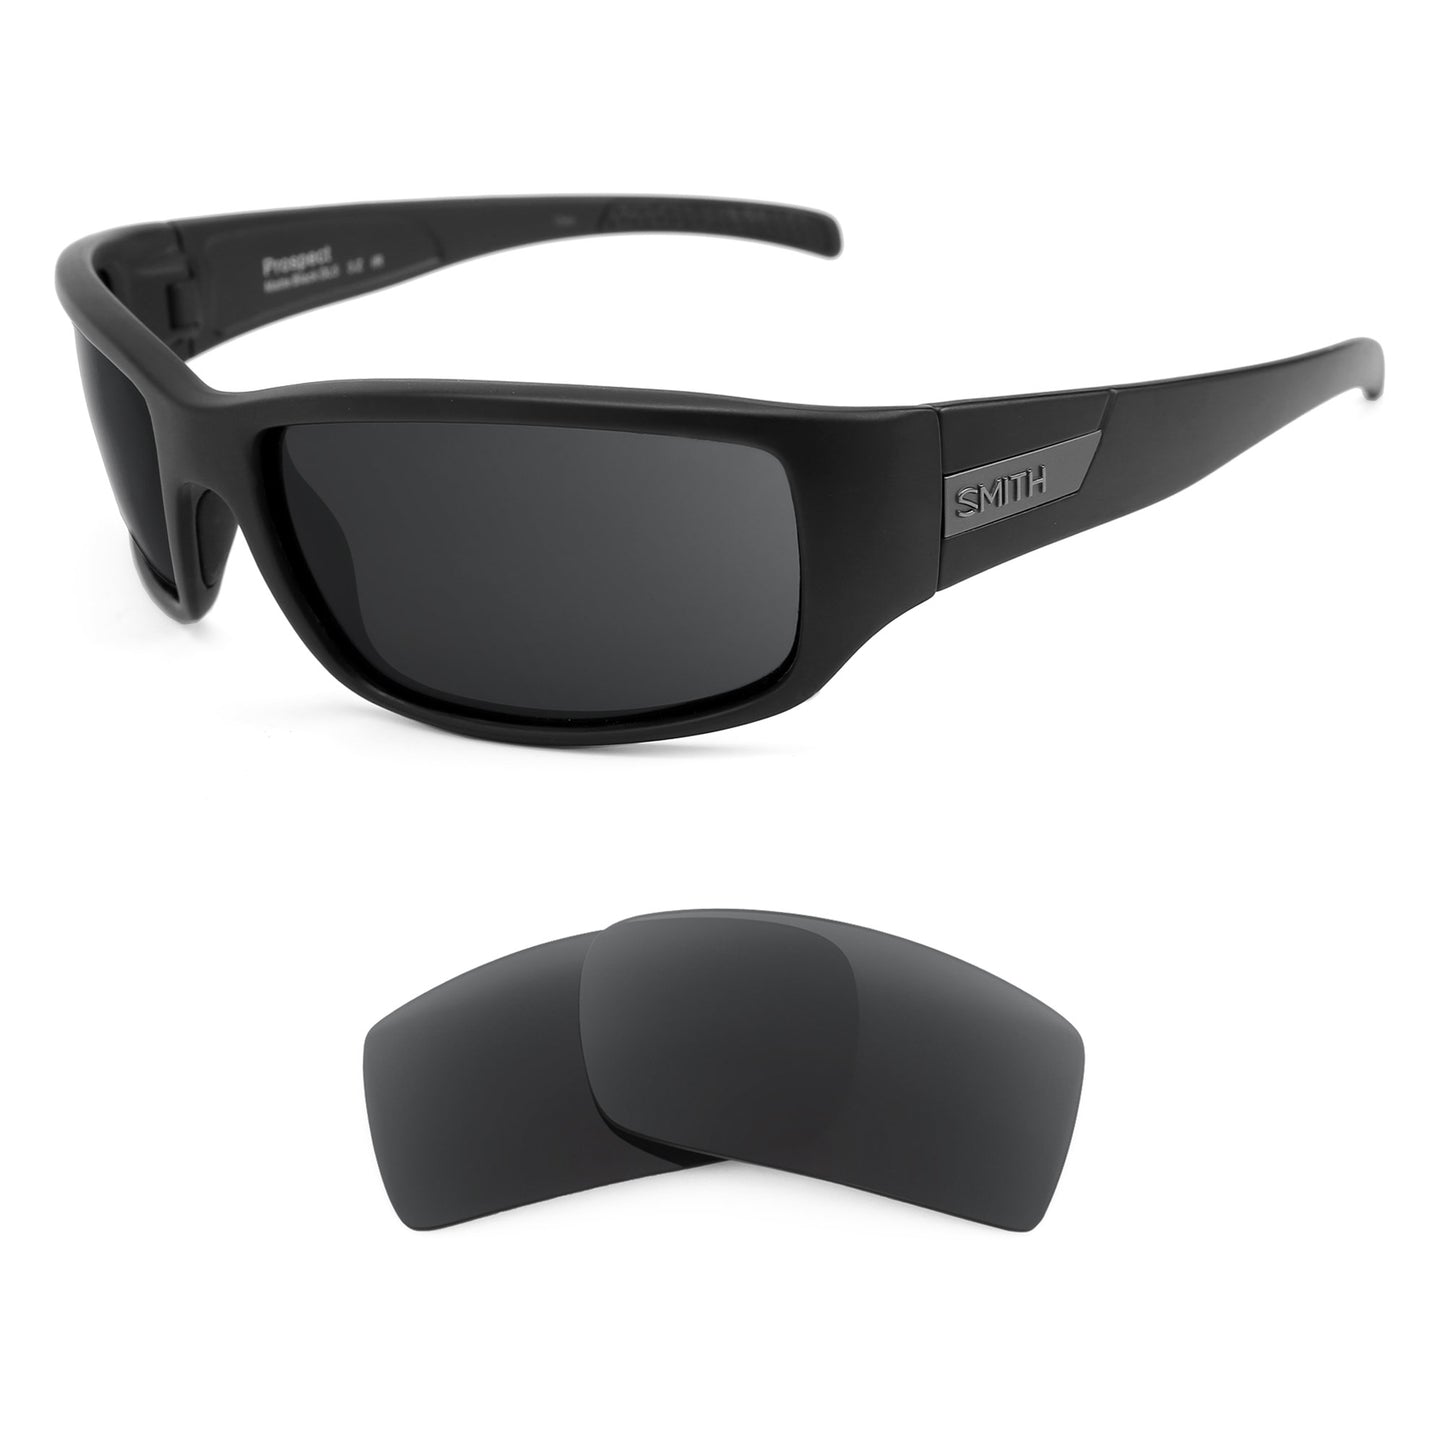 Smith Prospect sunglasses with replacement lenses